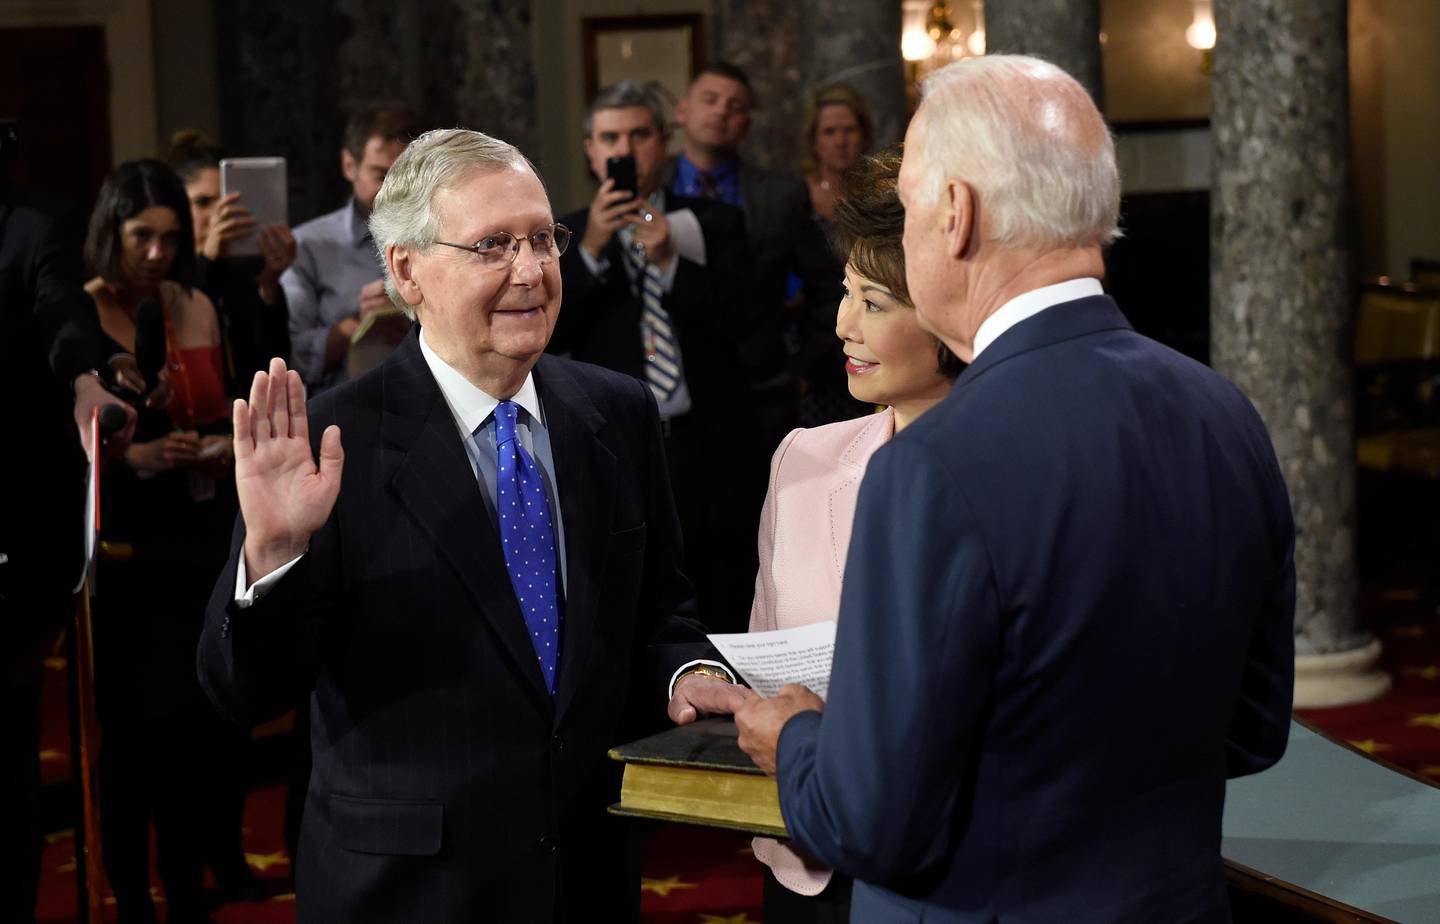 Vice President Joe Biden, right, administers the Senate oath to Senate Majority Leader Mitch McConnell of Ky. during a ceremonial re-enactment swearing-in ceremony, Tuesday, Jan. 6, 2015, in the Old Senate Chamber on Capitol Hill in Washington. McConnell's wife, former Labor Secretary Elaine Chao is at center. (AP Photo/Susan Walsh)